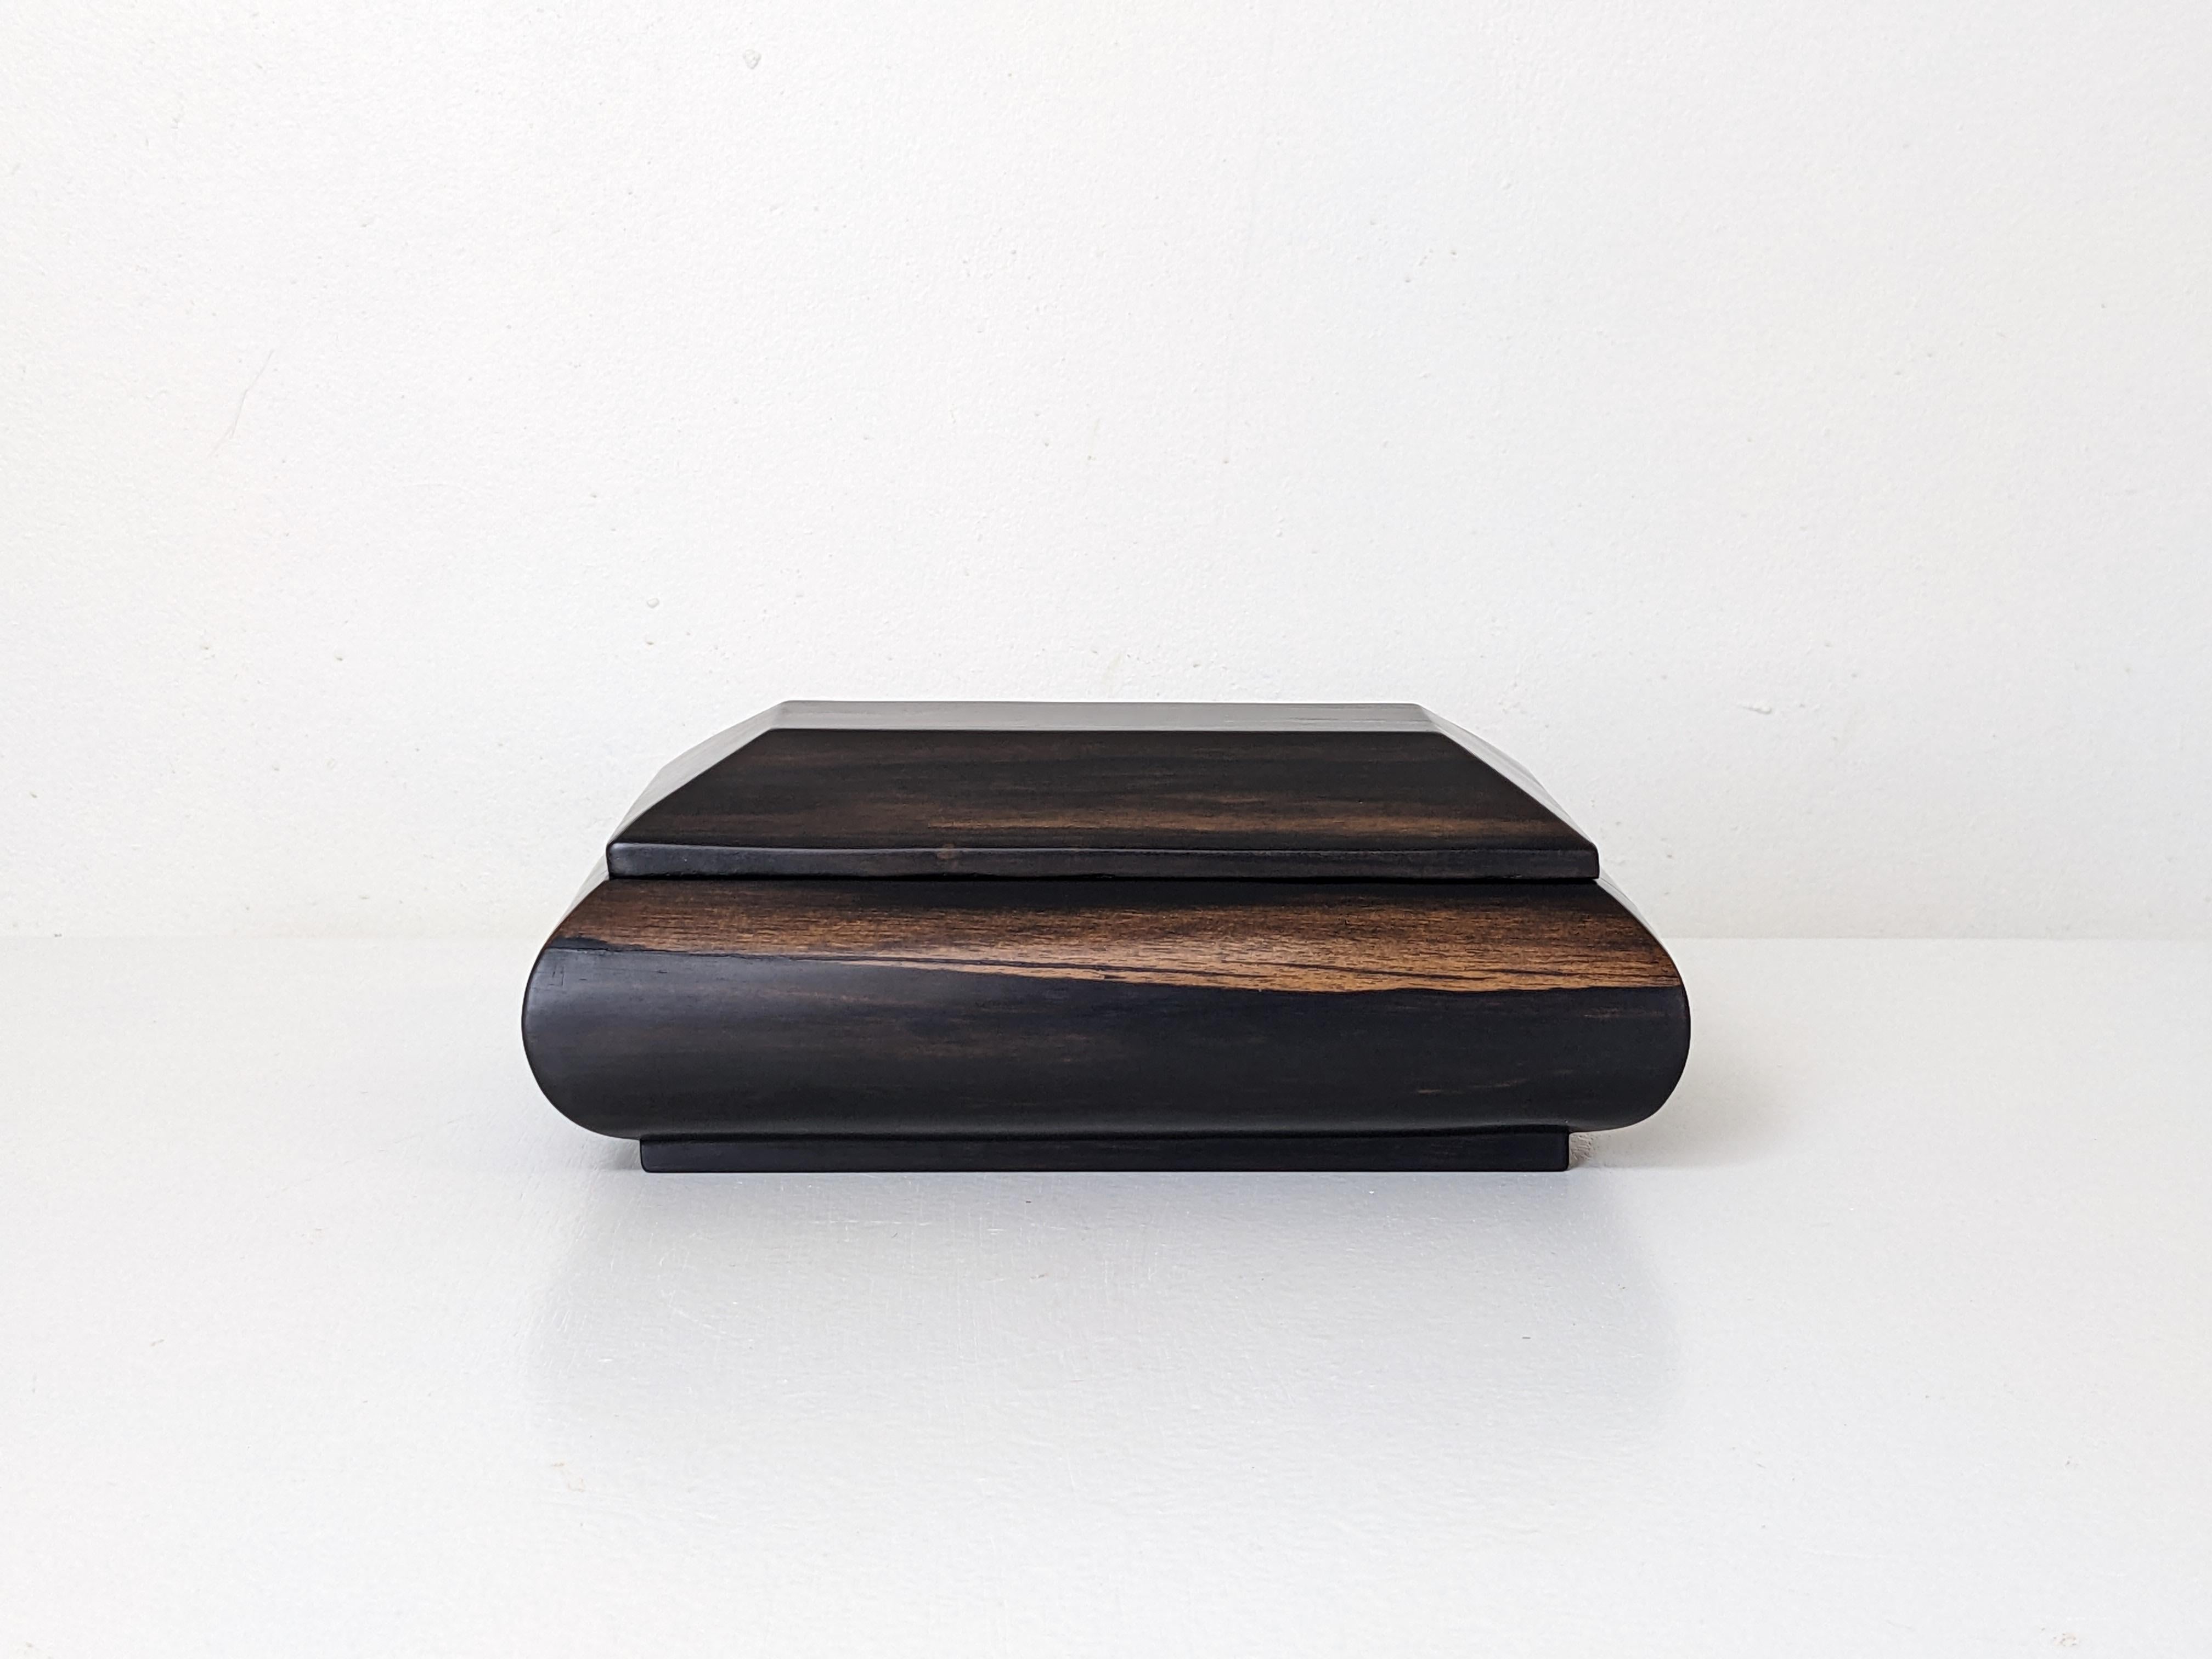 Art Deco Decorative Lidded Box in Solid Ebony Wood, France 1930s, 2 Available 4